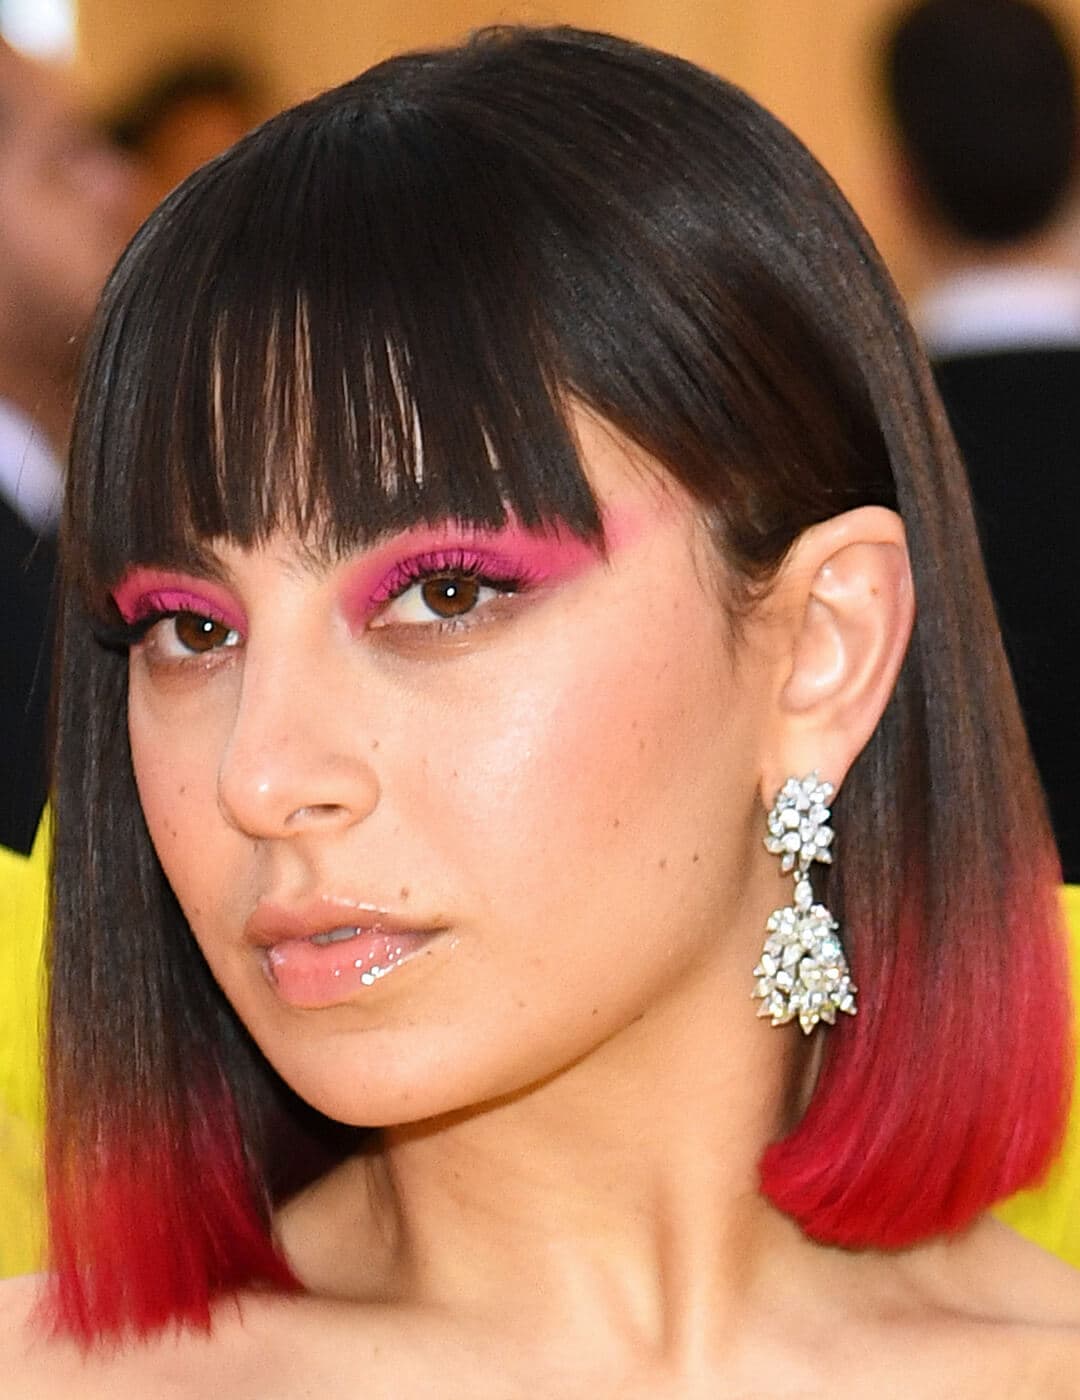 An image of Charli XCX showing her red-dyed tip hair together with her pink, smudgy look eyeliner